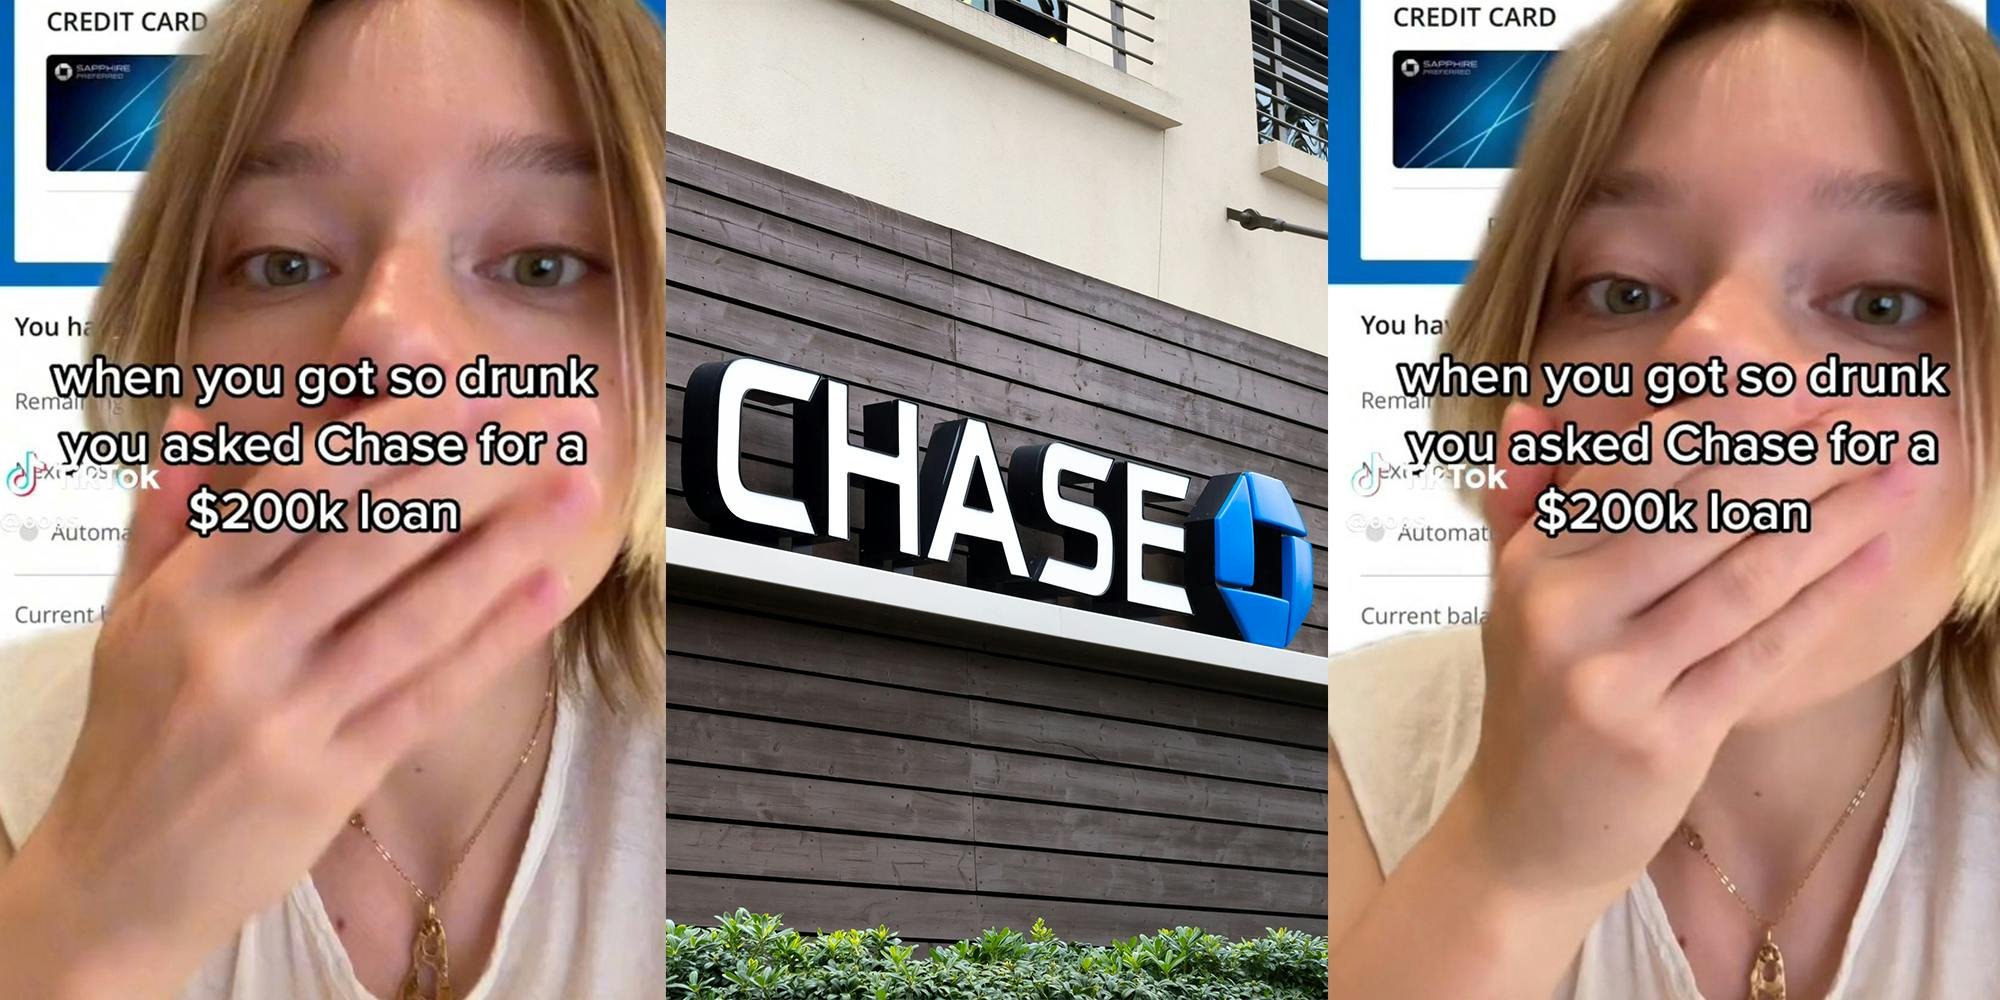 'How do you get approved that fast': Chase Bank allegedly approves $200K loan to woman with $750 in account